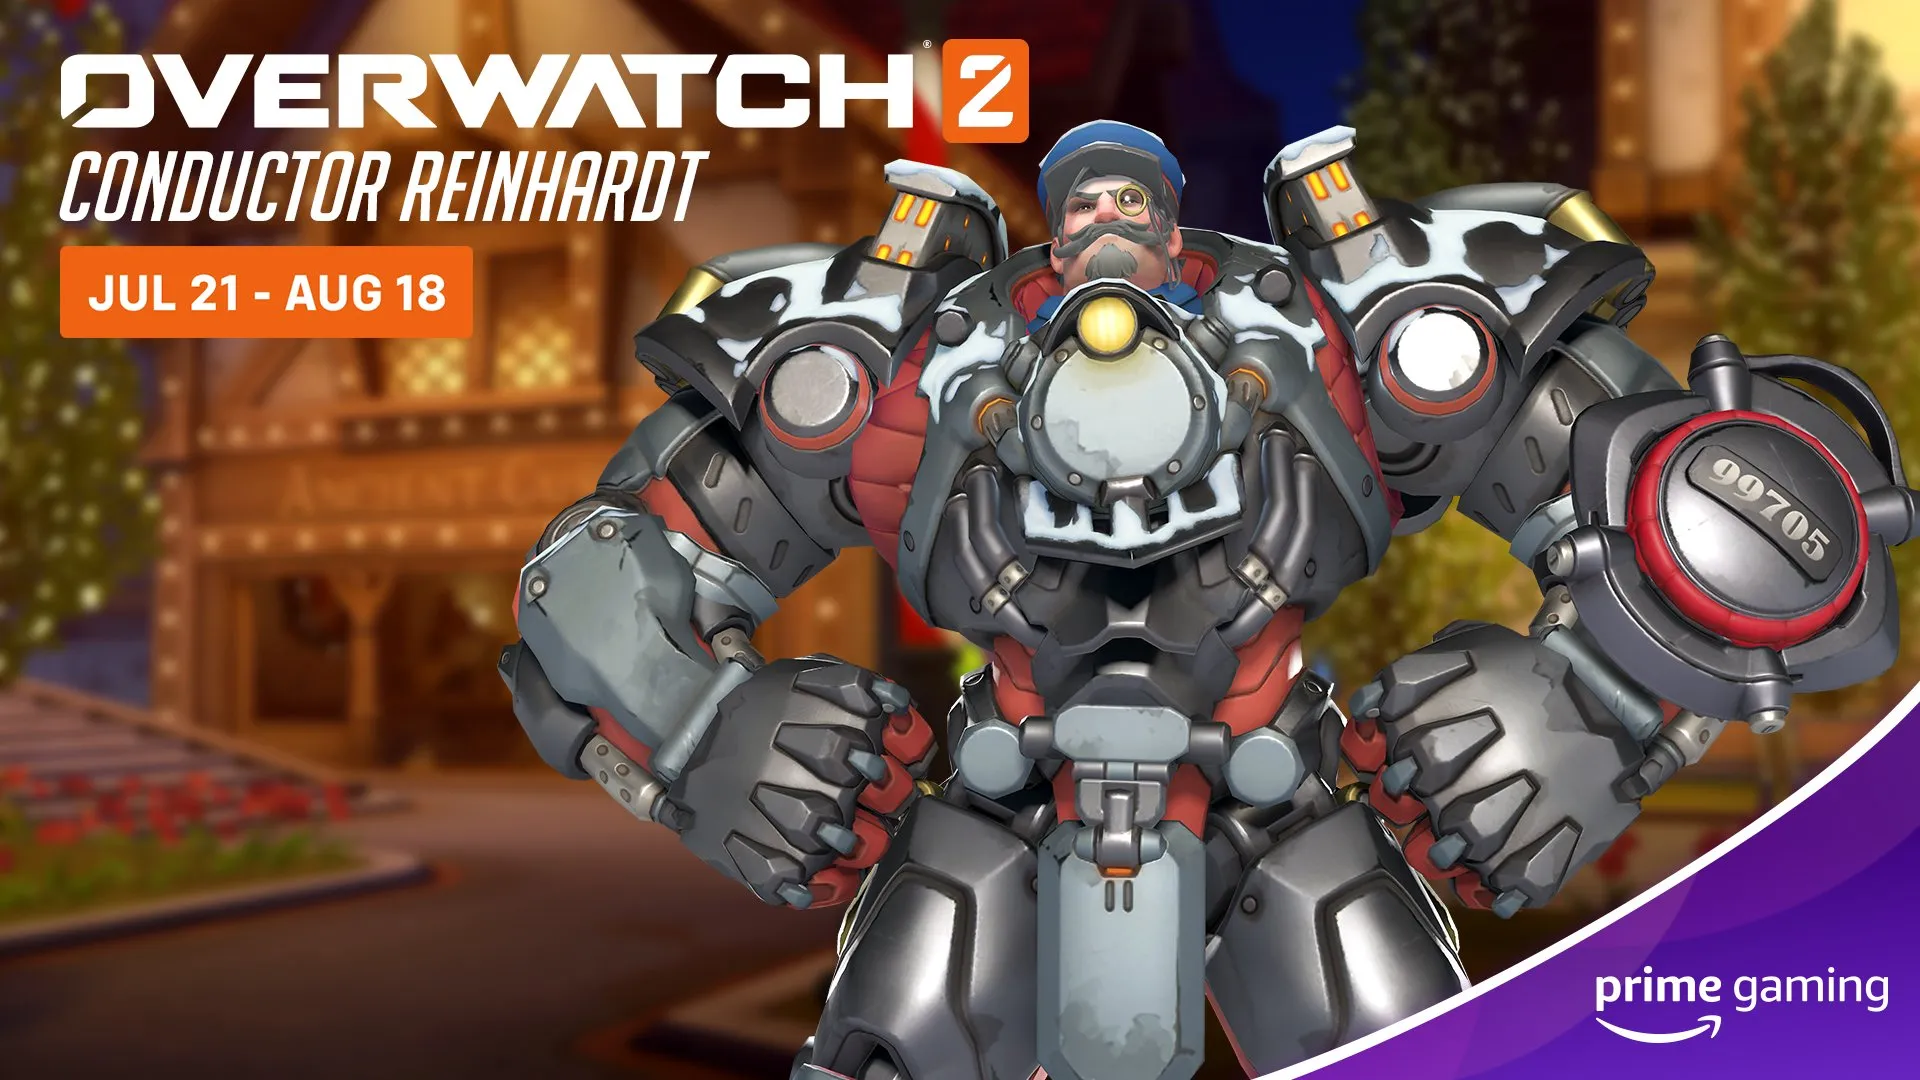 The Reinhardt Legendary Skin is now available as a Prime Gaming reward. Claim yours today and show your opponents who